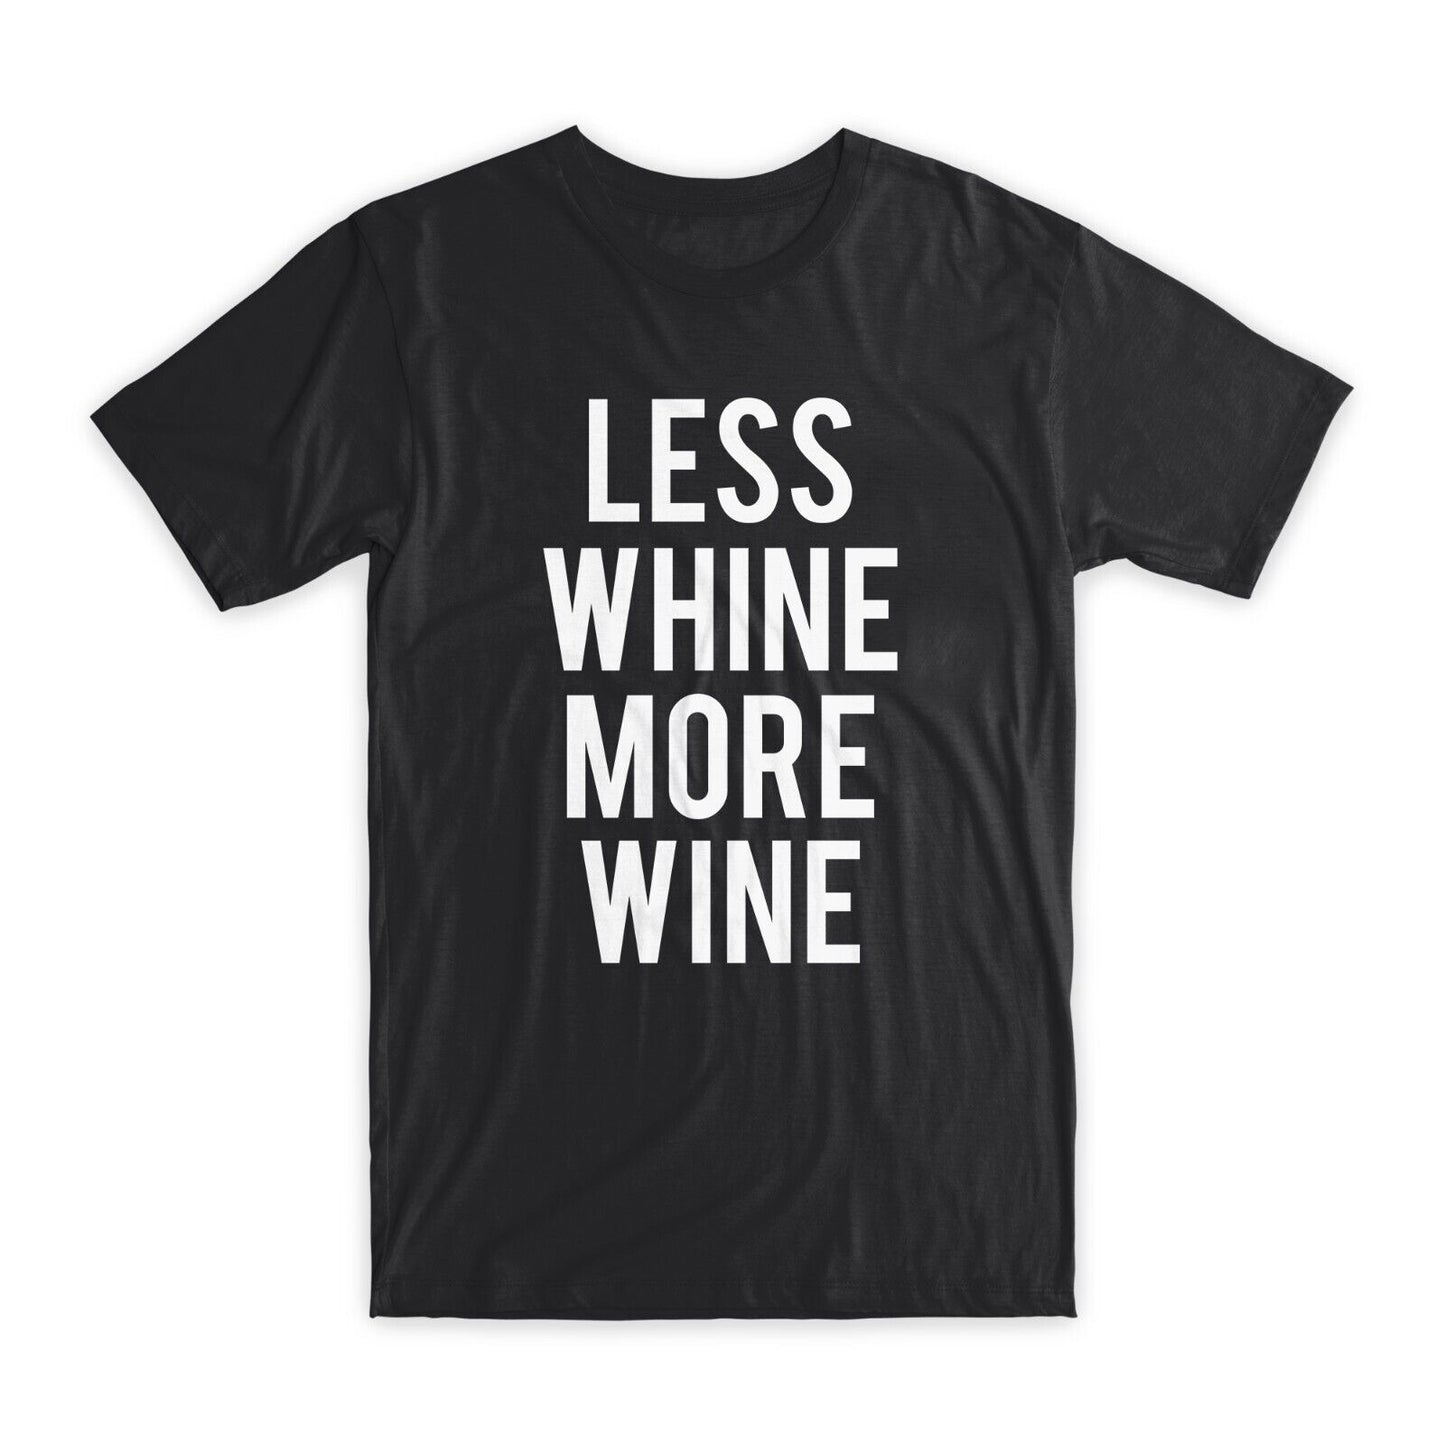 Less Whine More Wine T-Shirt Premium Soft Cotton Crew Neck Funny Tees Gifts NEW